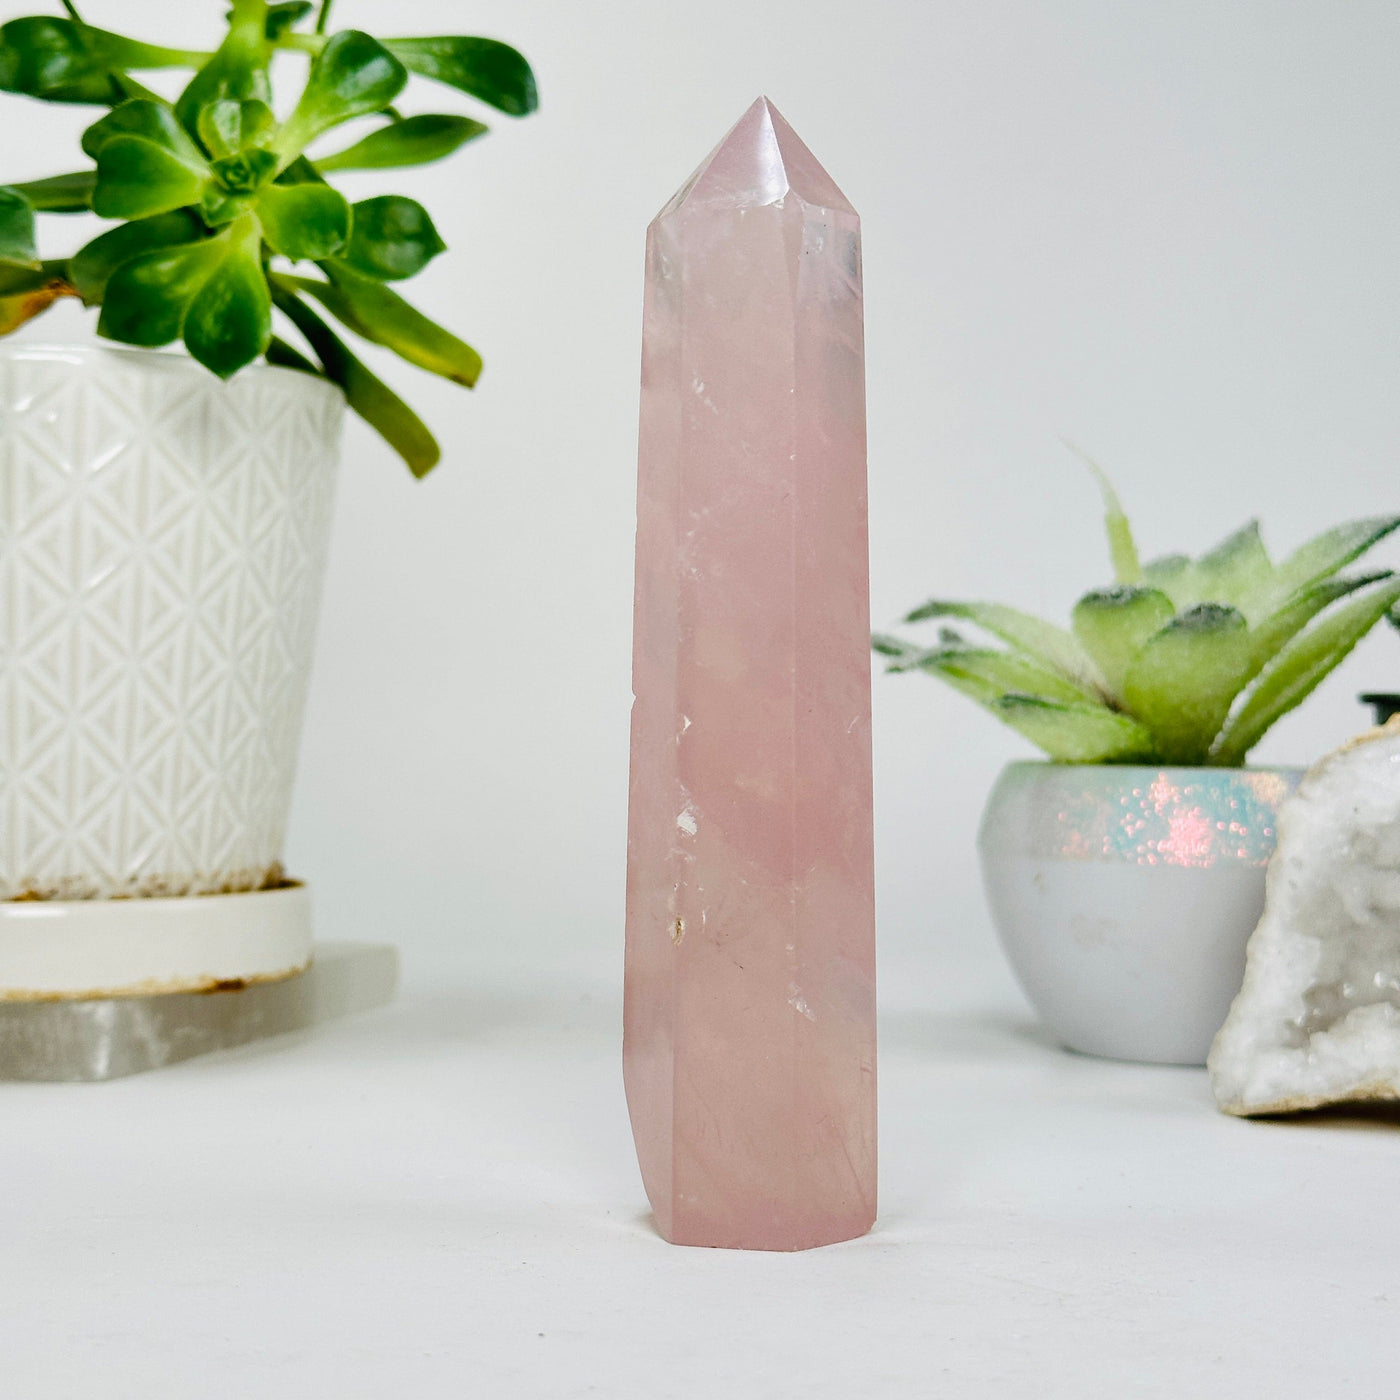 rose quartz polished point with decorations in the background